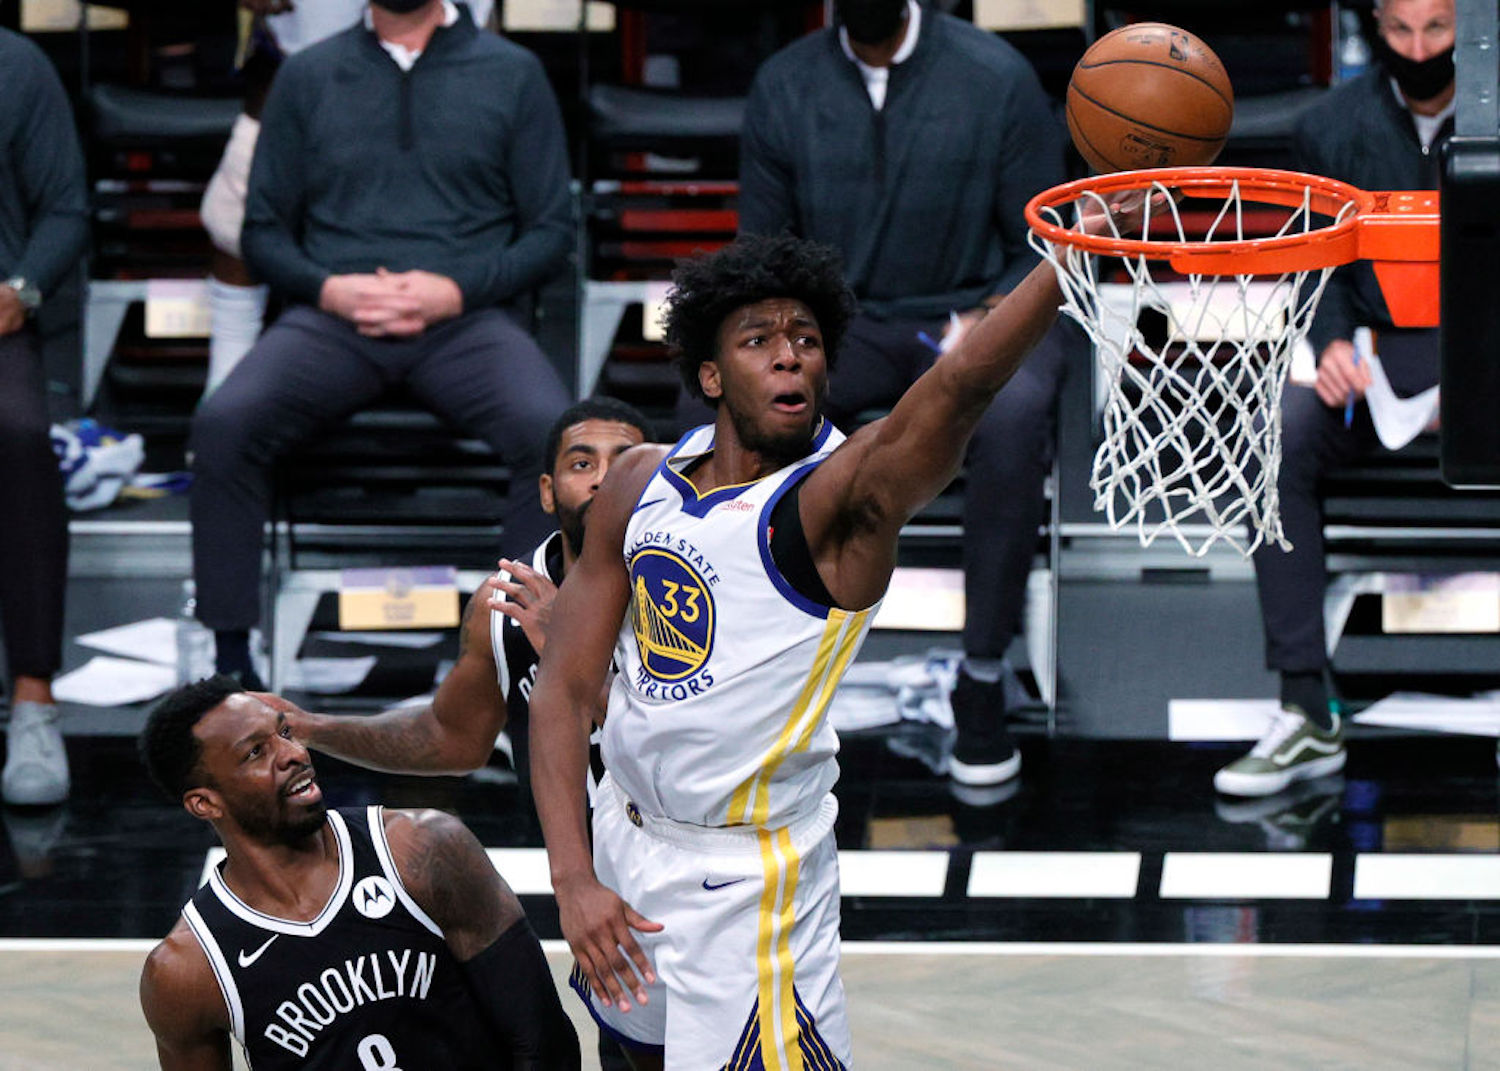 Not much went right for the Golden State Warriors on Tuesday night, but rookie first-round pick James Wiseman looked like the real deal.